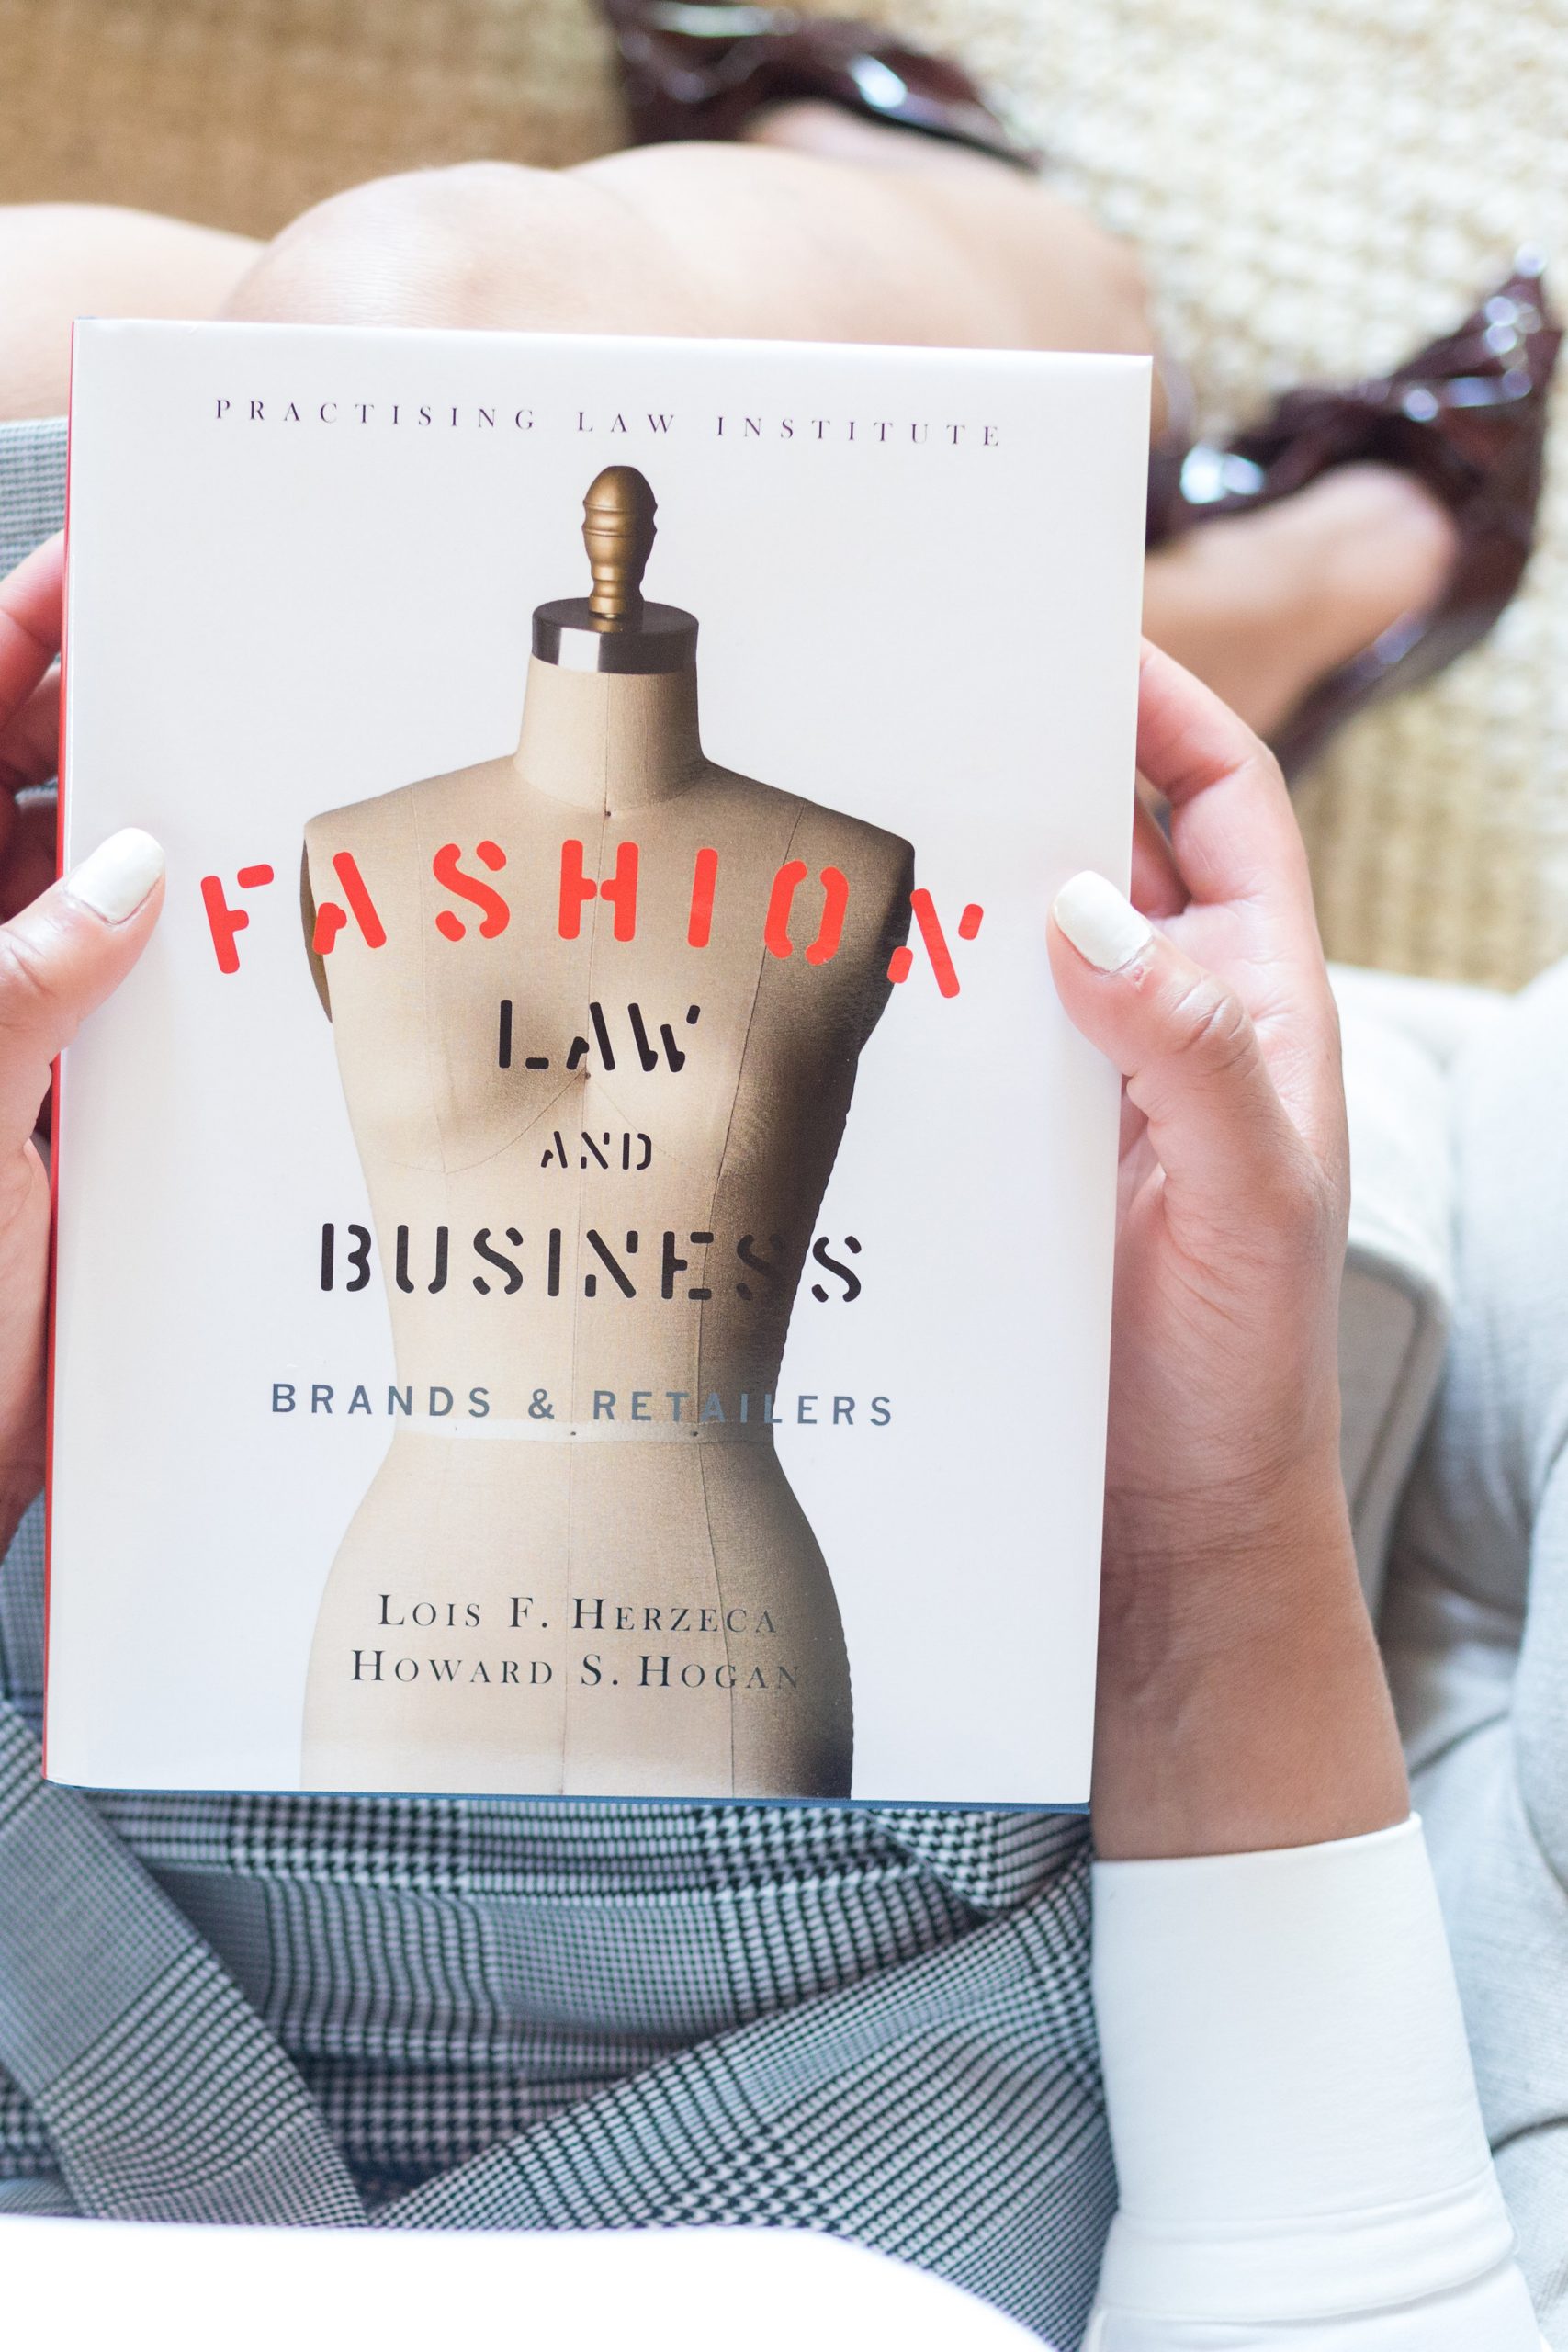 A book about fashion law business and legal services